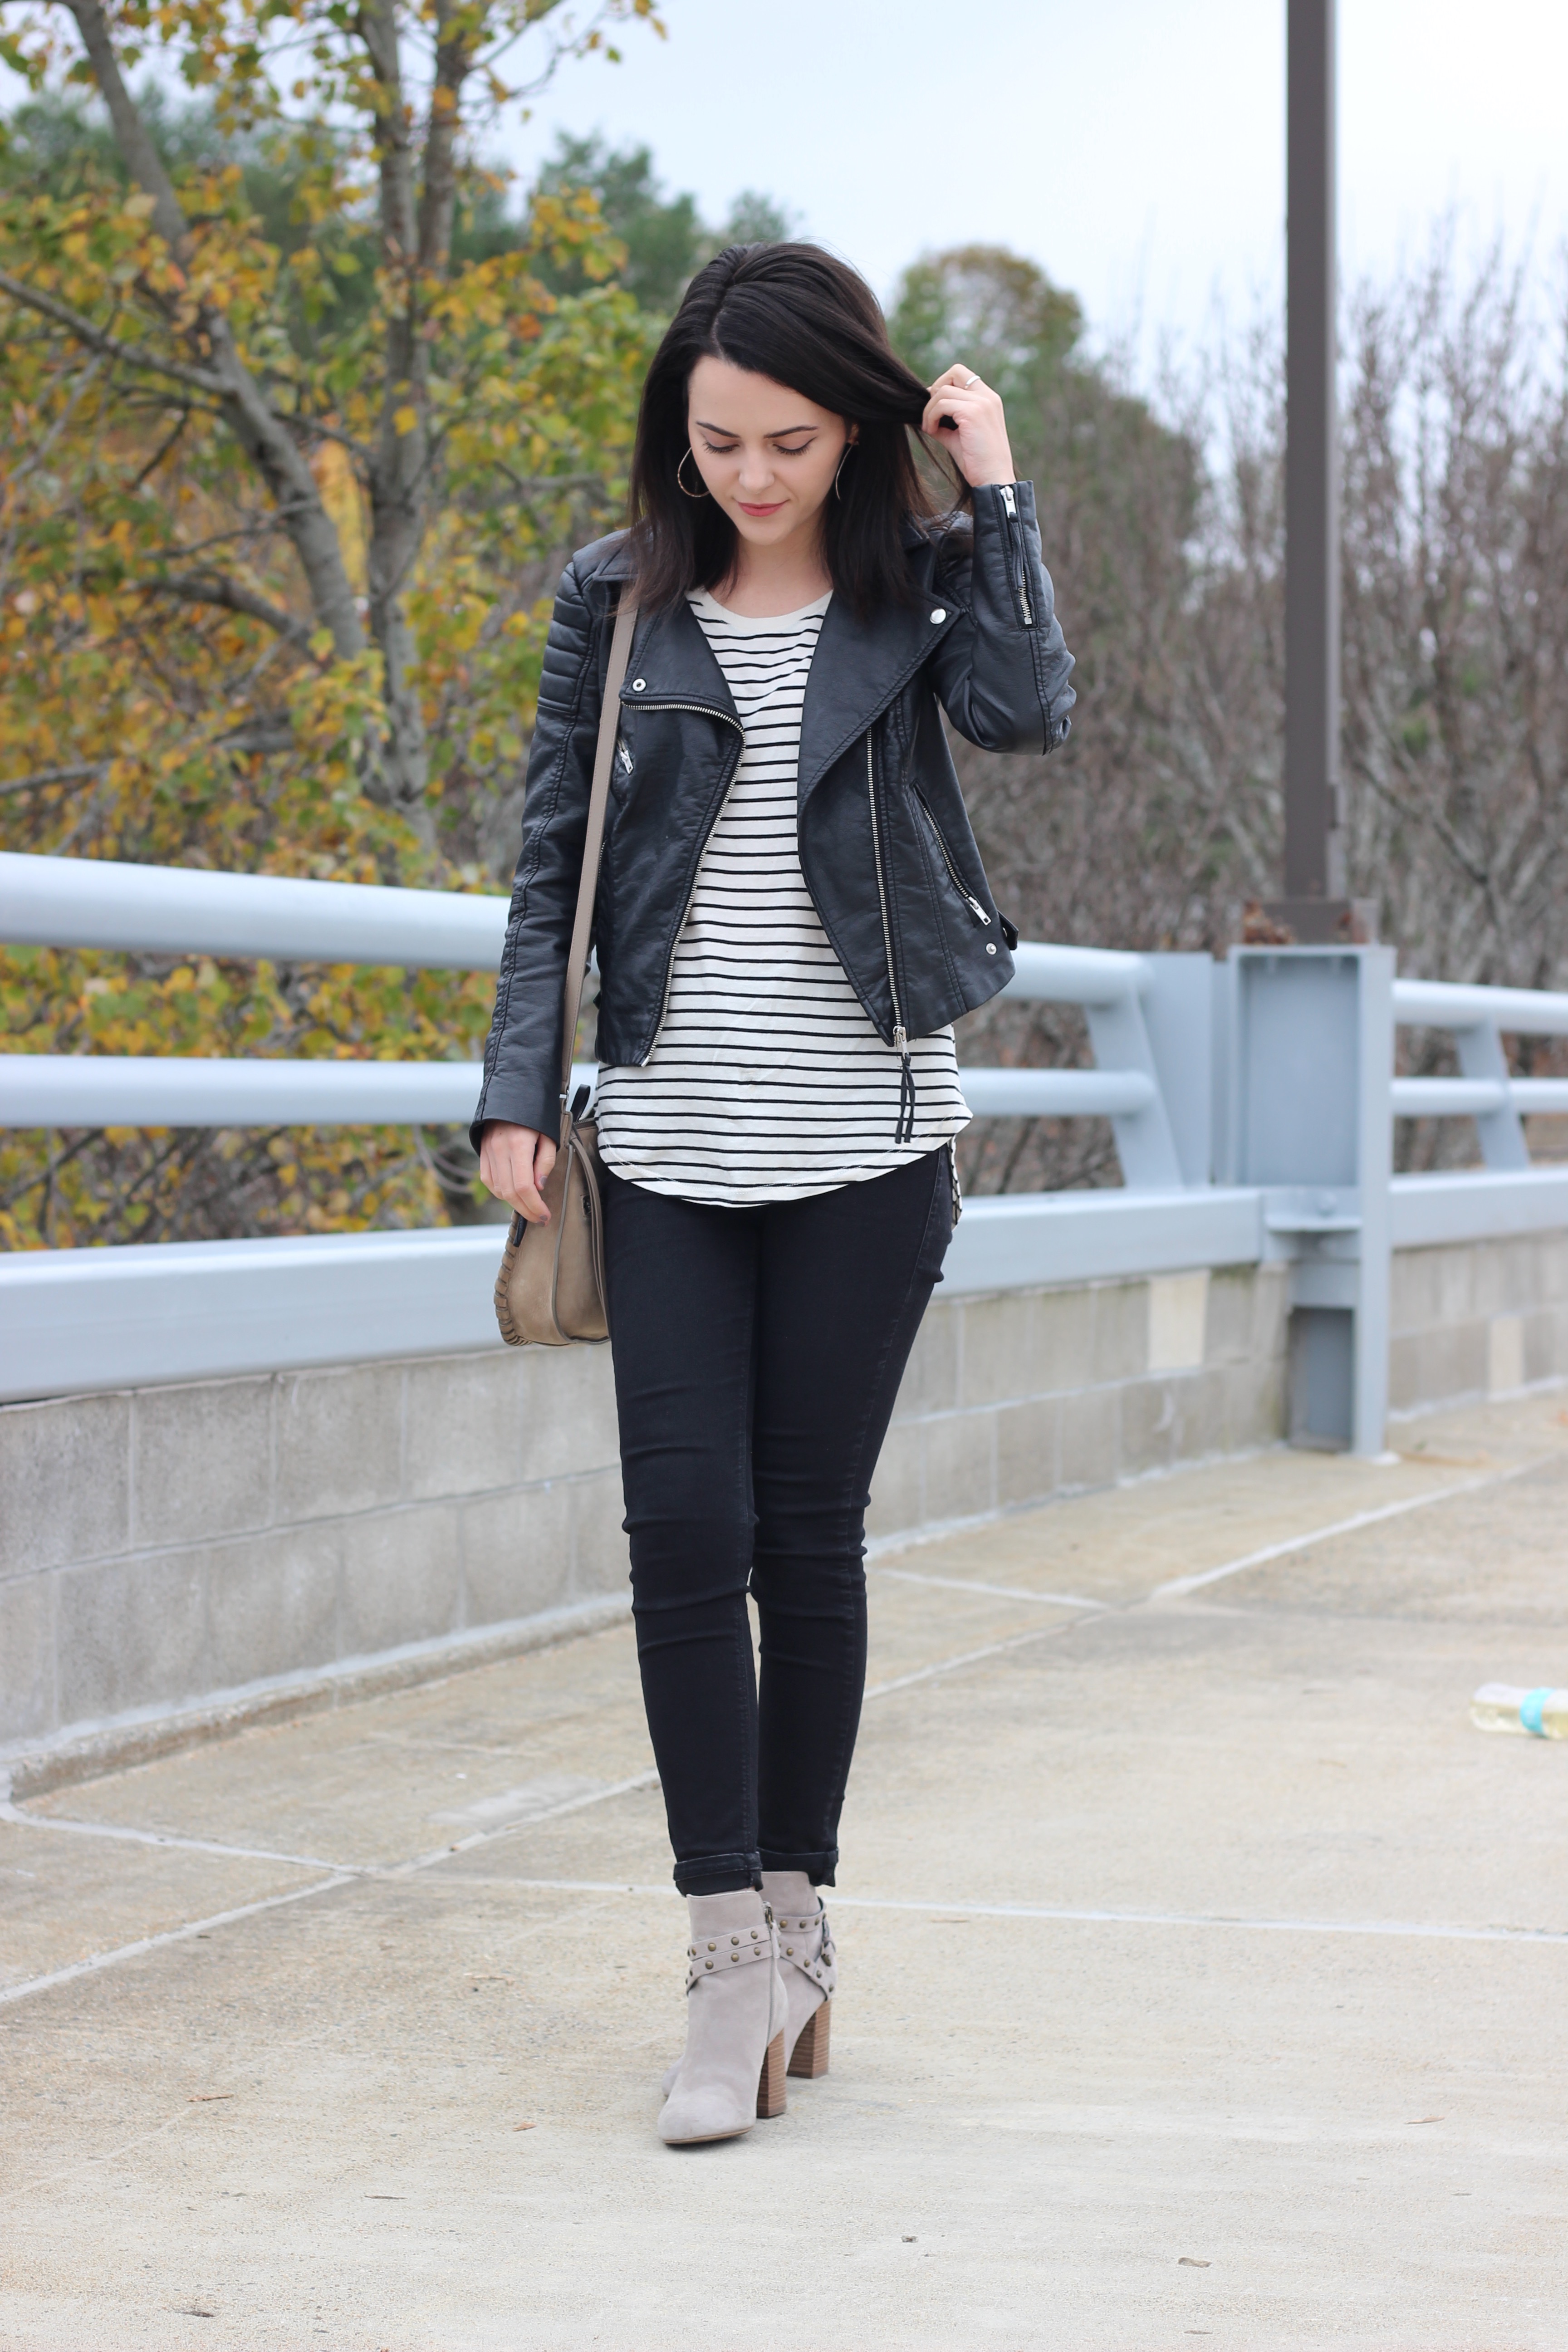 Striped Shirt + Leather Jacket : OOTD